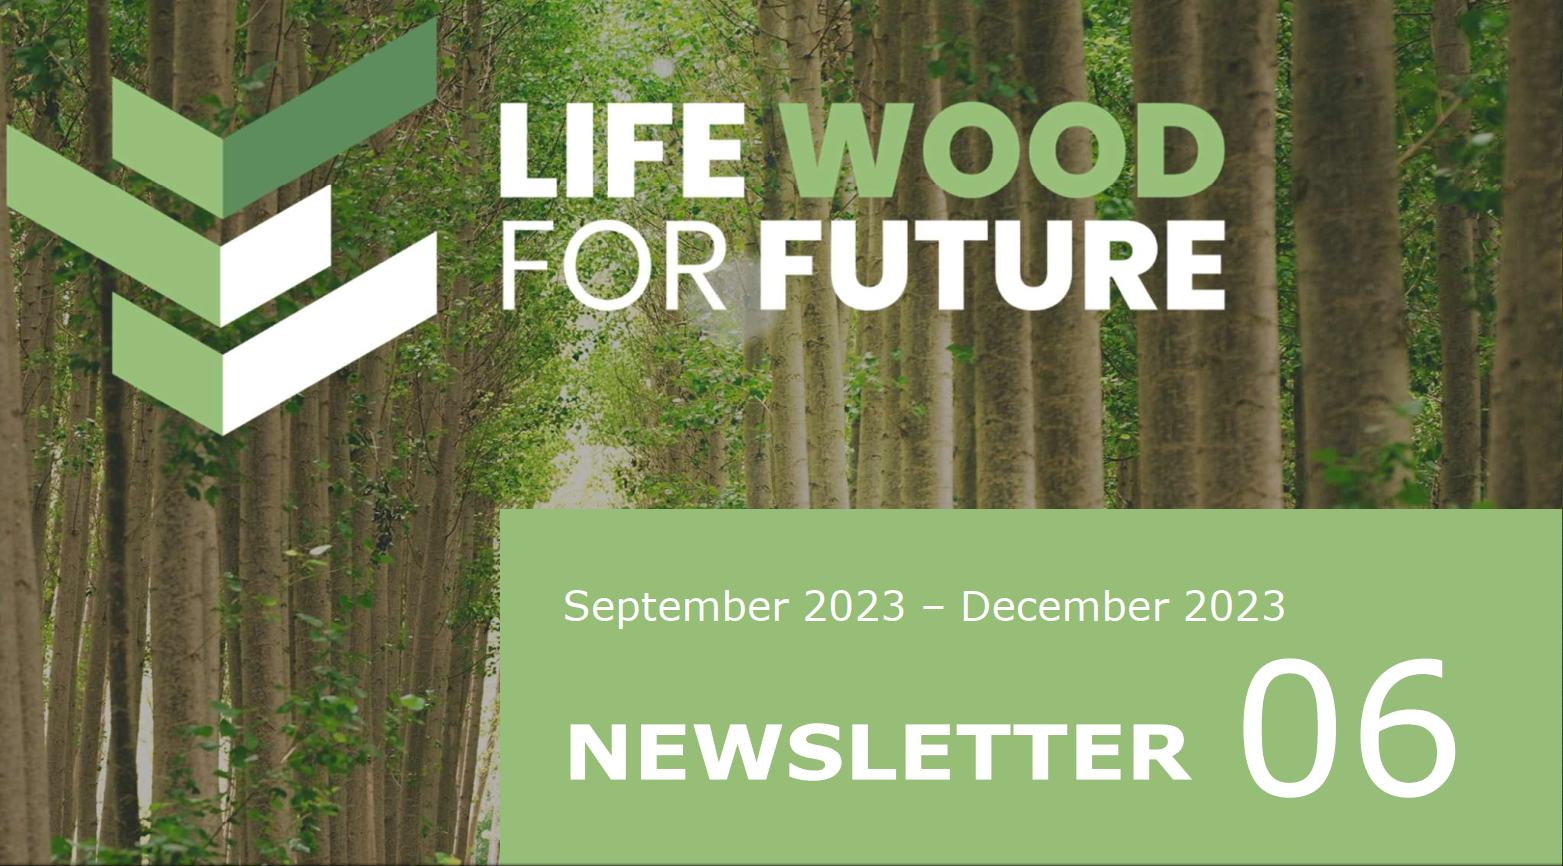 PUBLICATION OF THE SIXTH NEWSLETTER OF THE LIFE WOOD FOR FUTURE PROJECT